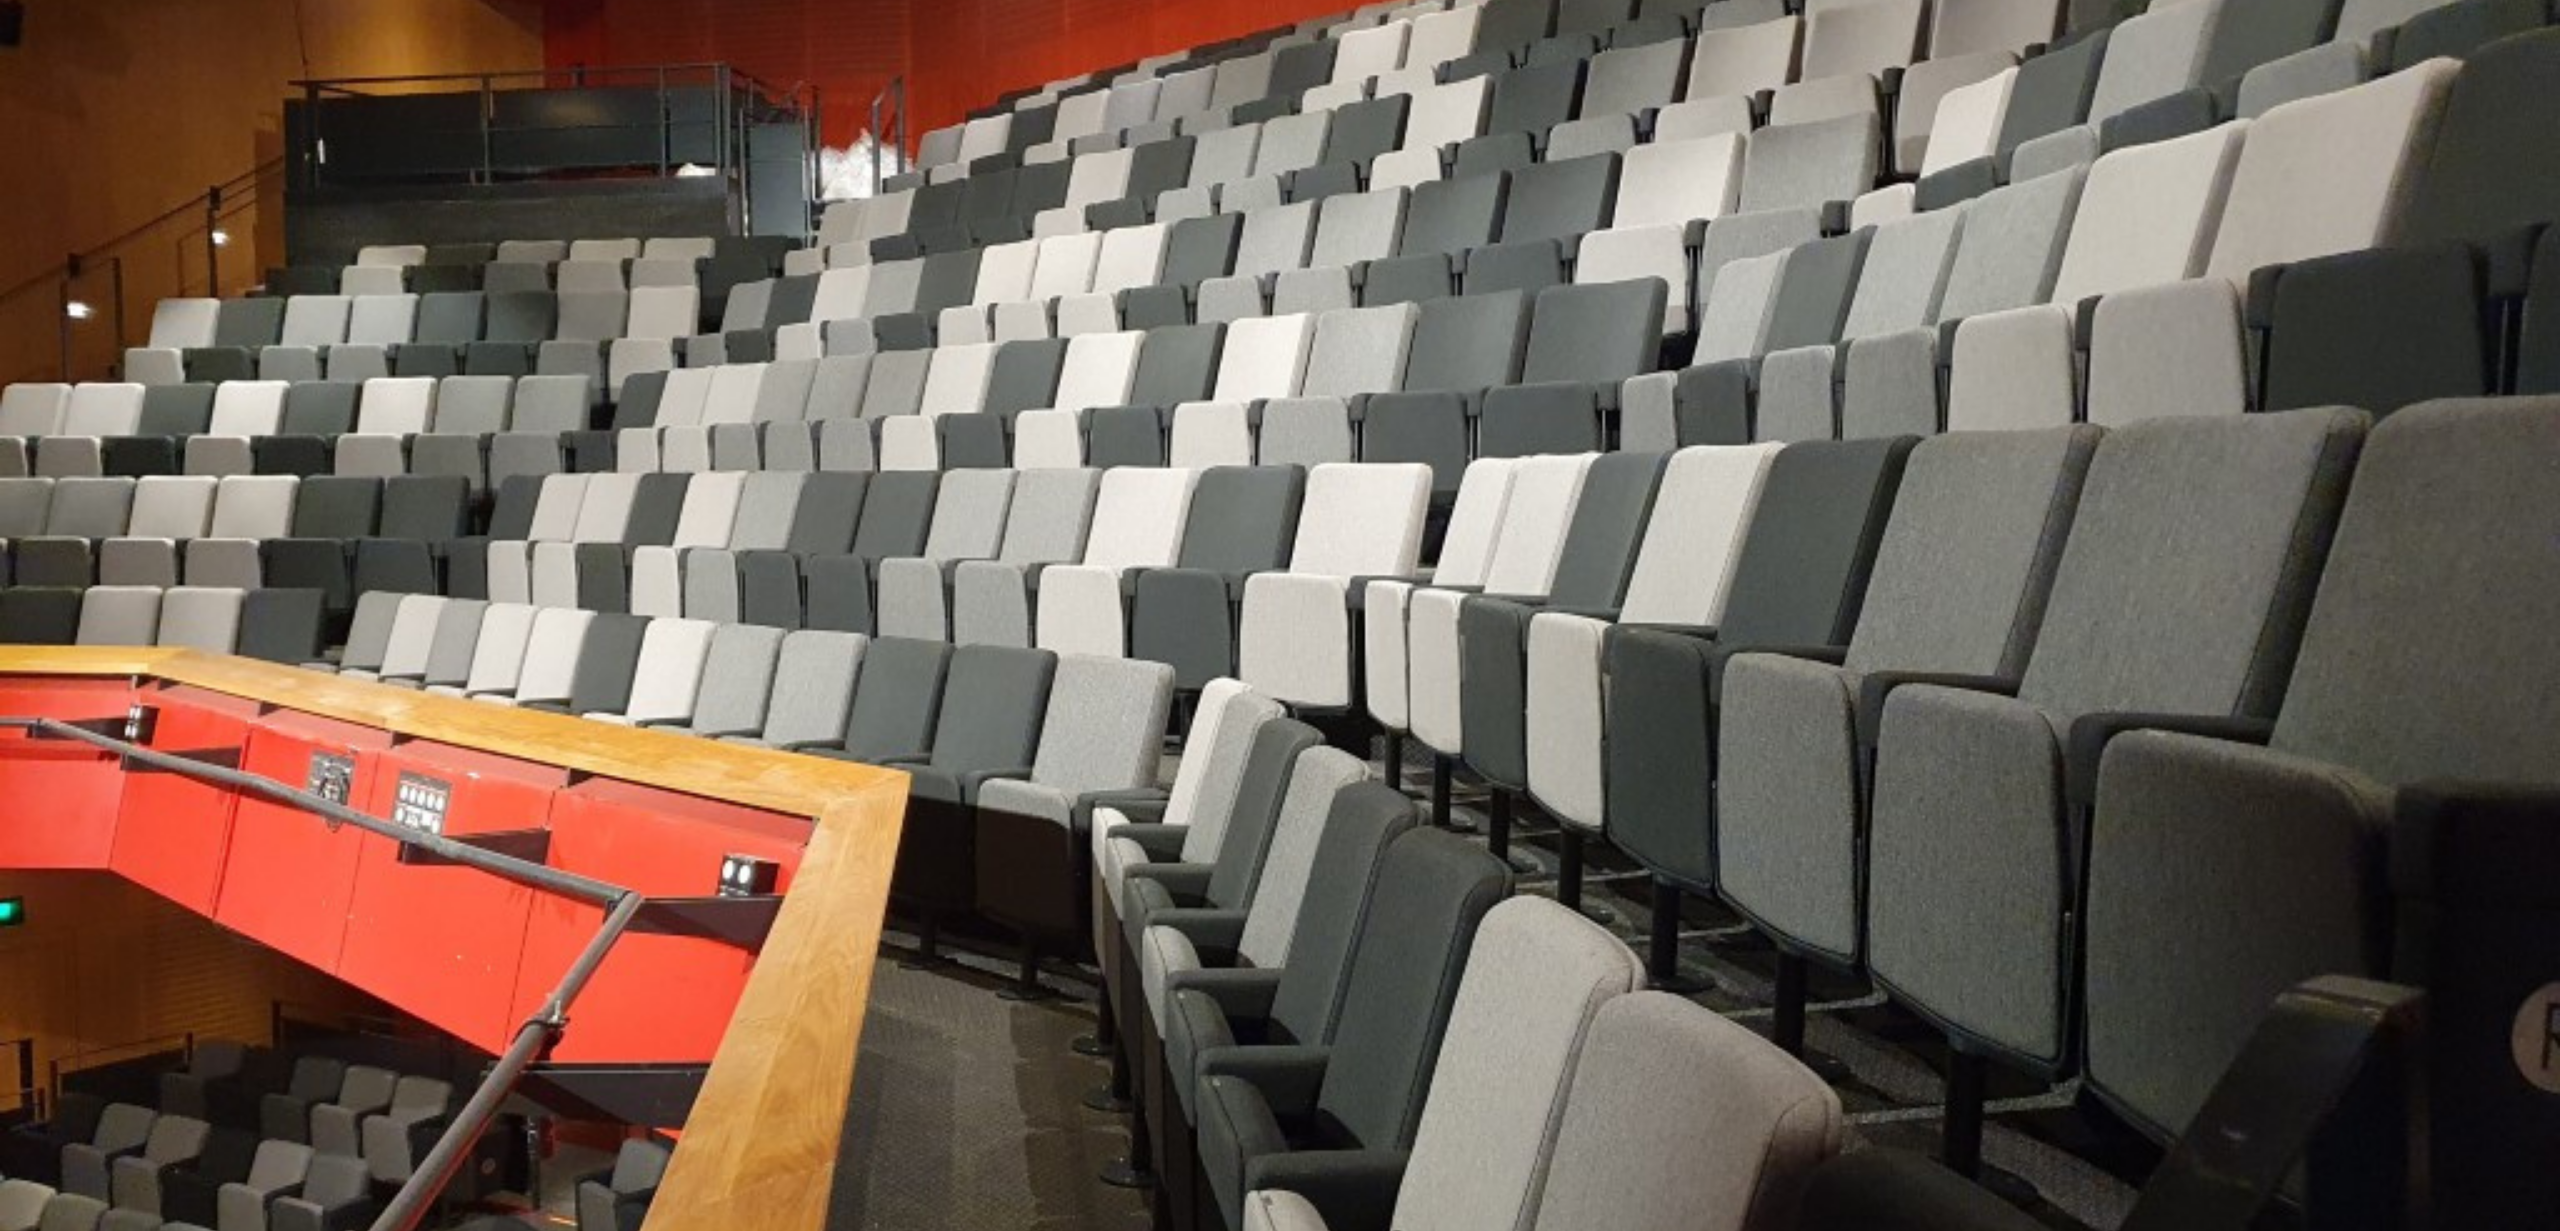 A large auditorium with a grey and white auditorium seating design